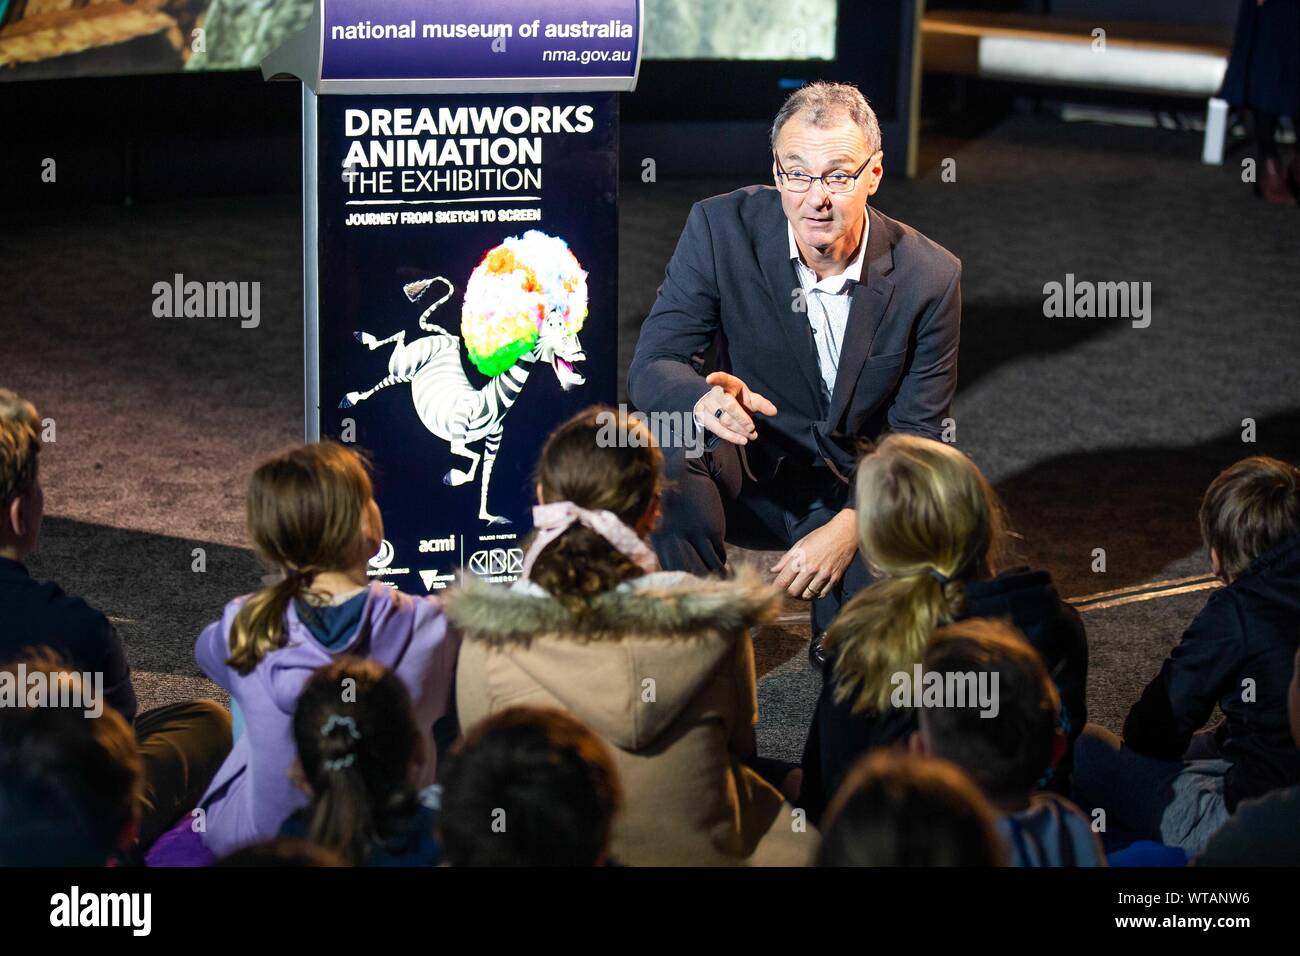 (190911) -- CANBERRA, Sept. 11, 2019 (Xinhua) -- Director of the National Museum of Australia (NWA) Mathew Trinca talks with students from local schools at NWA in Canberra, Australia, Sept. 11, 2019. NMA will launch the DreamWorks Animation: The Exhibition on Thursday. Running until Feb. 2, 2020, the exhibition features more than 400 items from 33 DreamWorks Animation films, including Shrek, Madagascar, Kung Fu Panda, Prince of Egypt, How to Train Your Dragon. TO GO WITH 'Feature: Walking into the world of Shrek and Kung Fu Panda' (Xinhua/Liang Tianzhou) Stock Photo